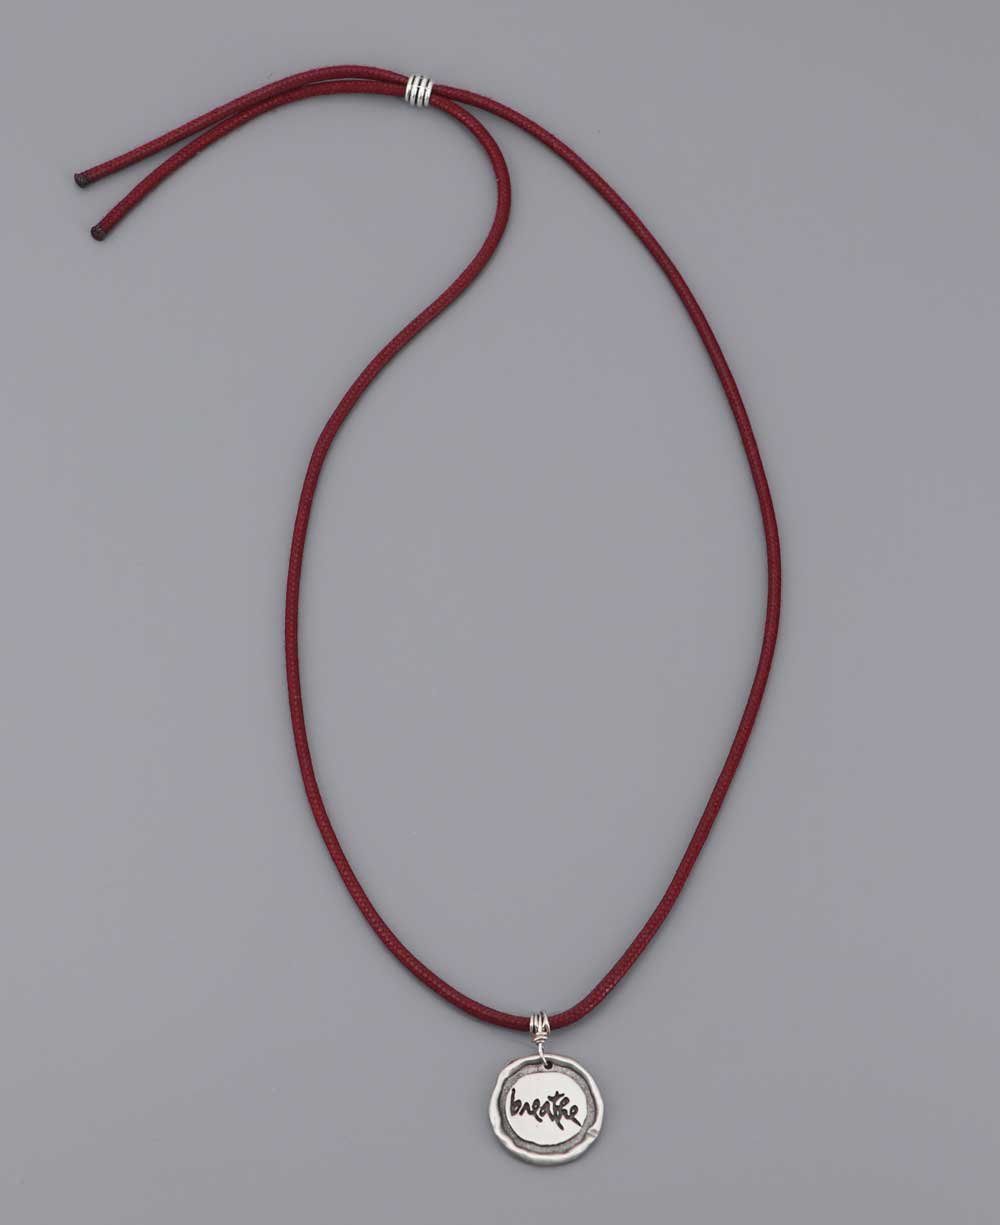 Thich Nhat Hanh Breathe Necklace - Necklaces